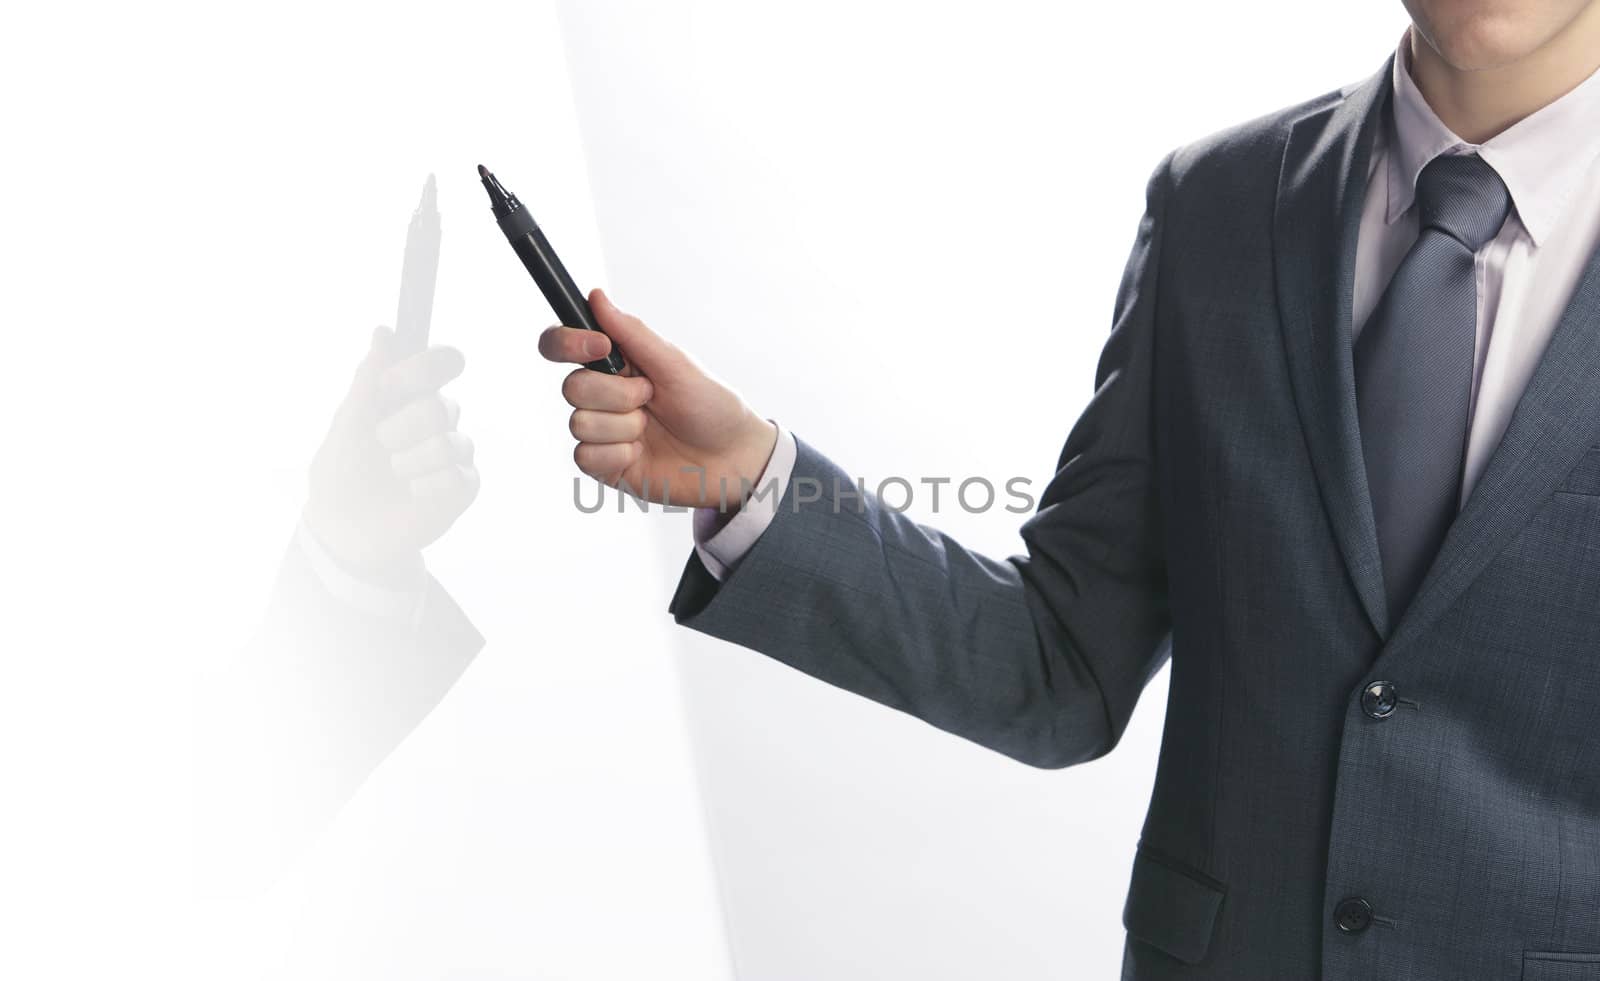 Businessman pointing with a pen by stokkete